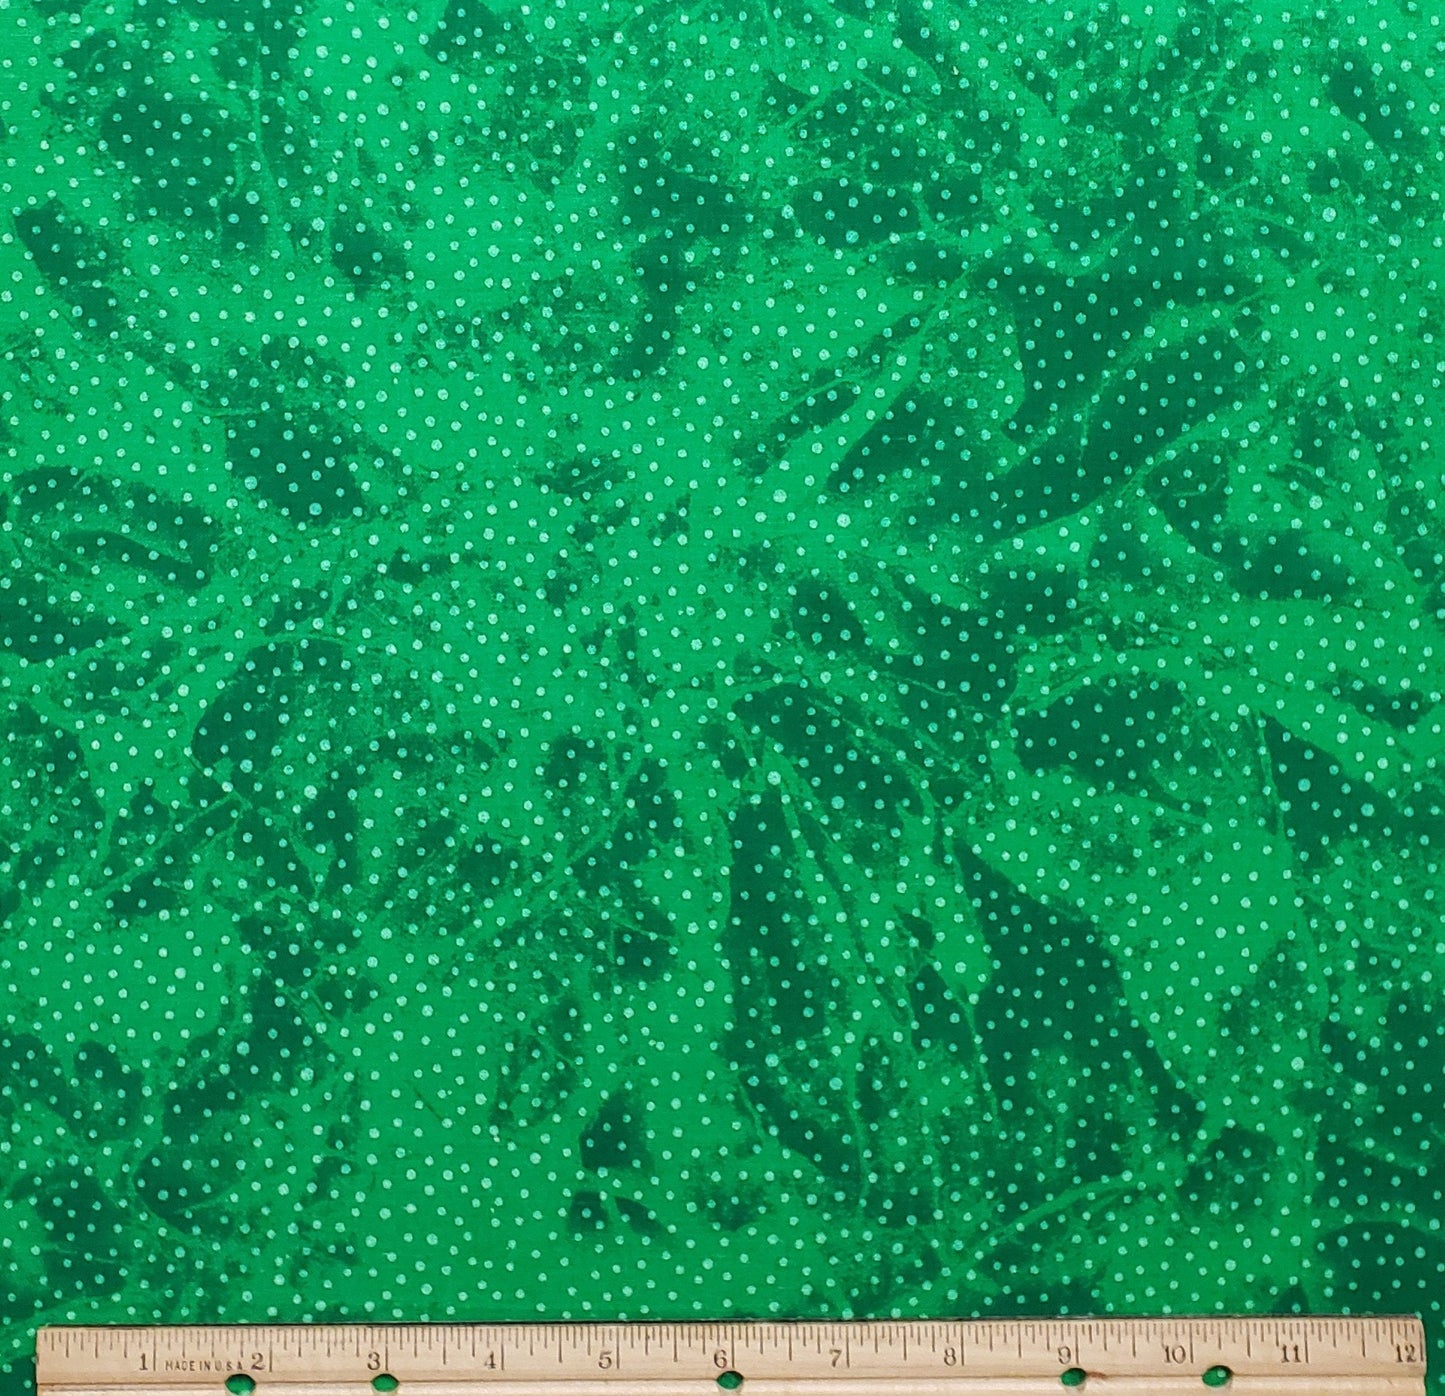 Green Tone-on-Tone Fabric with Light Green Spots